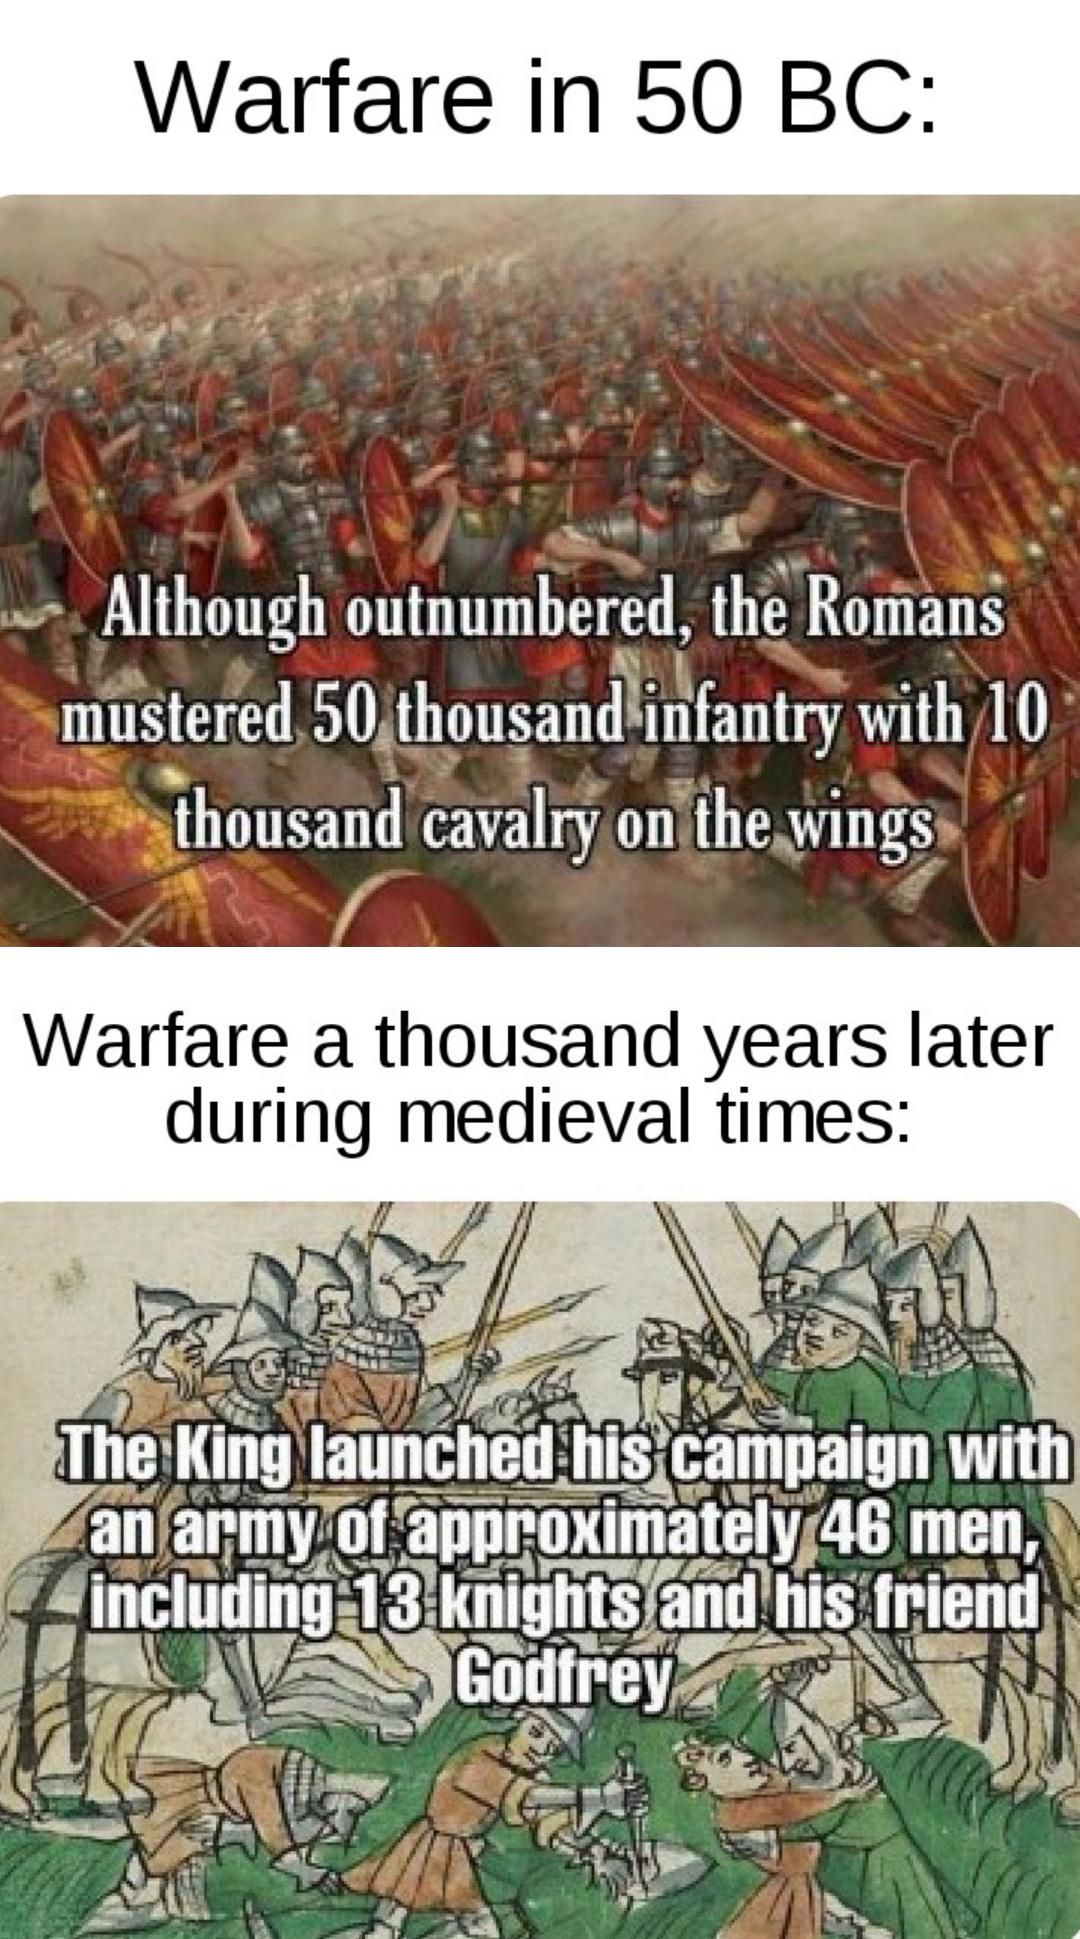 Why do you think the size of armies was so small during the medieval ages compared to the roman times